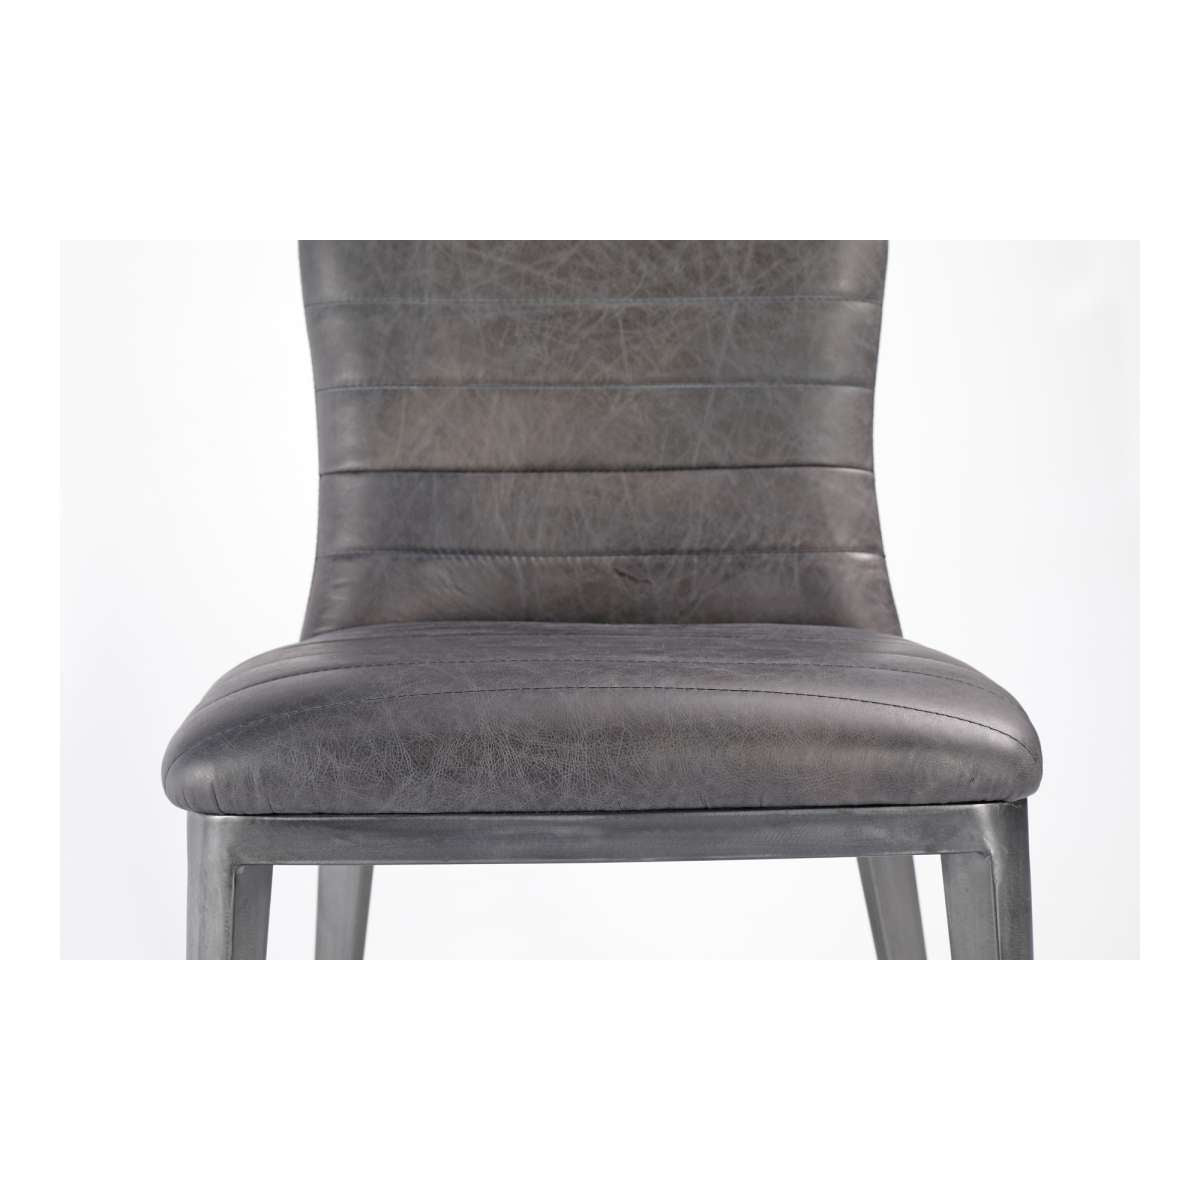 Shelton Dining Chair-M2 By Moe's Home Collection